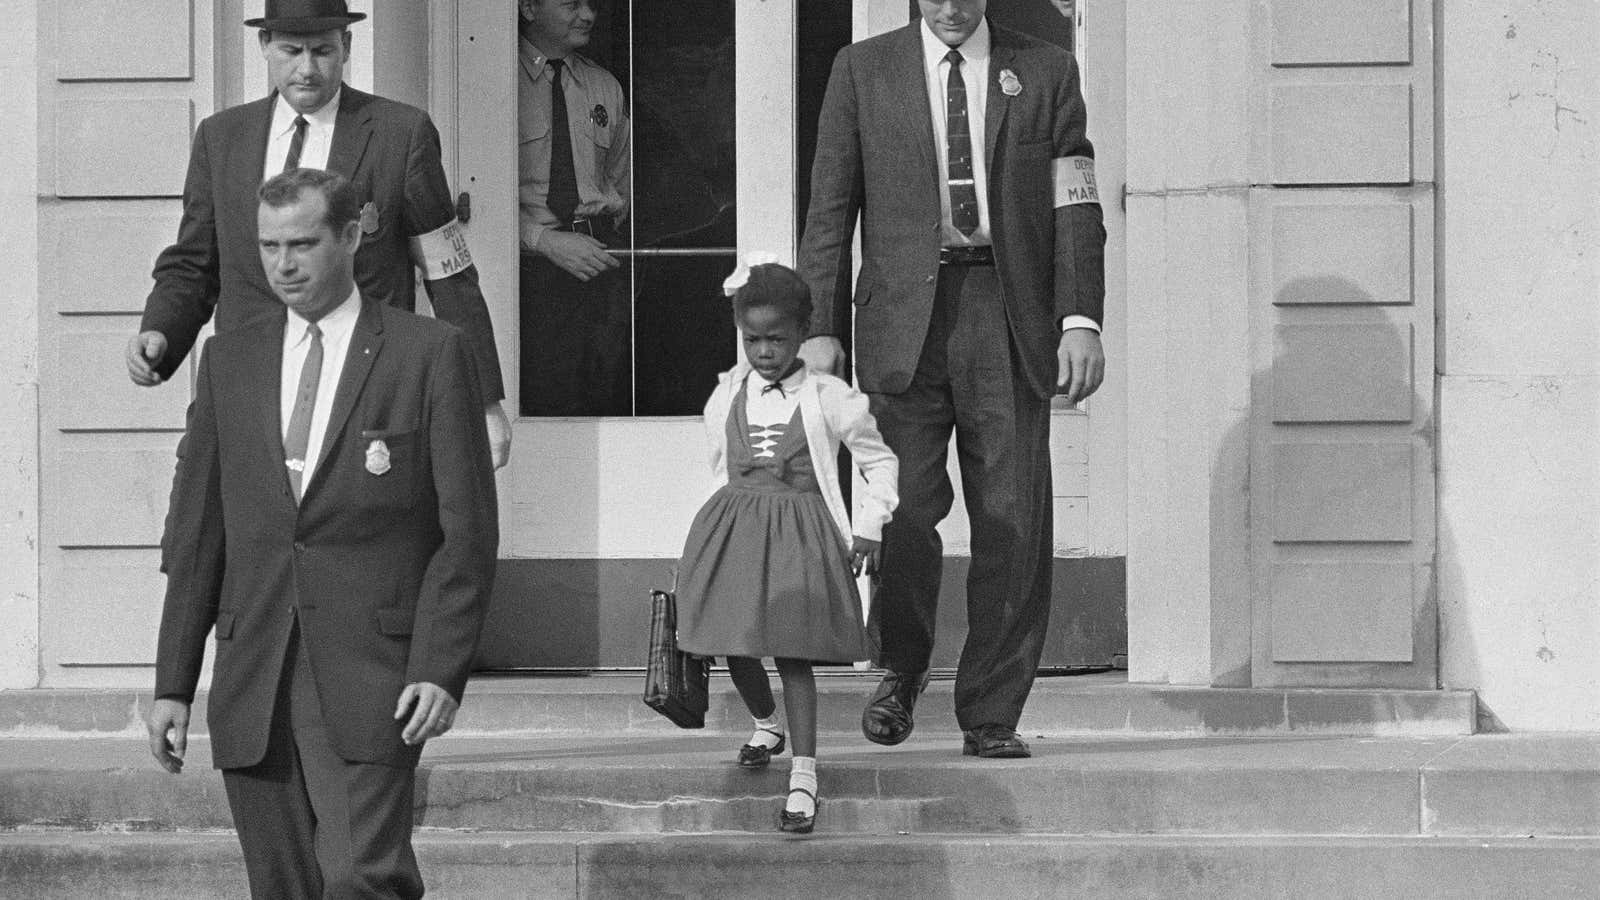 US deputy marshals escort 6-year-old Ruby Bridges from William Frantz Elementary School in New Orleans, La.  The first grader was the only black child enrolled in the schol